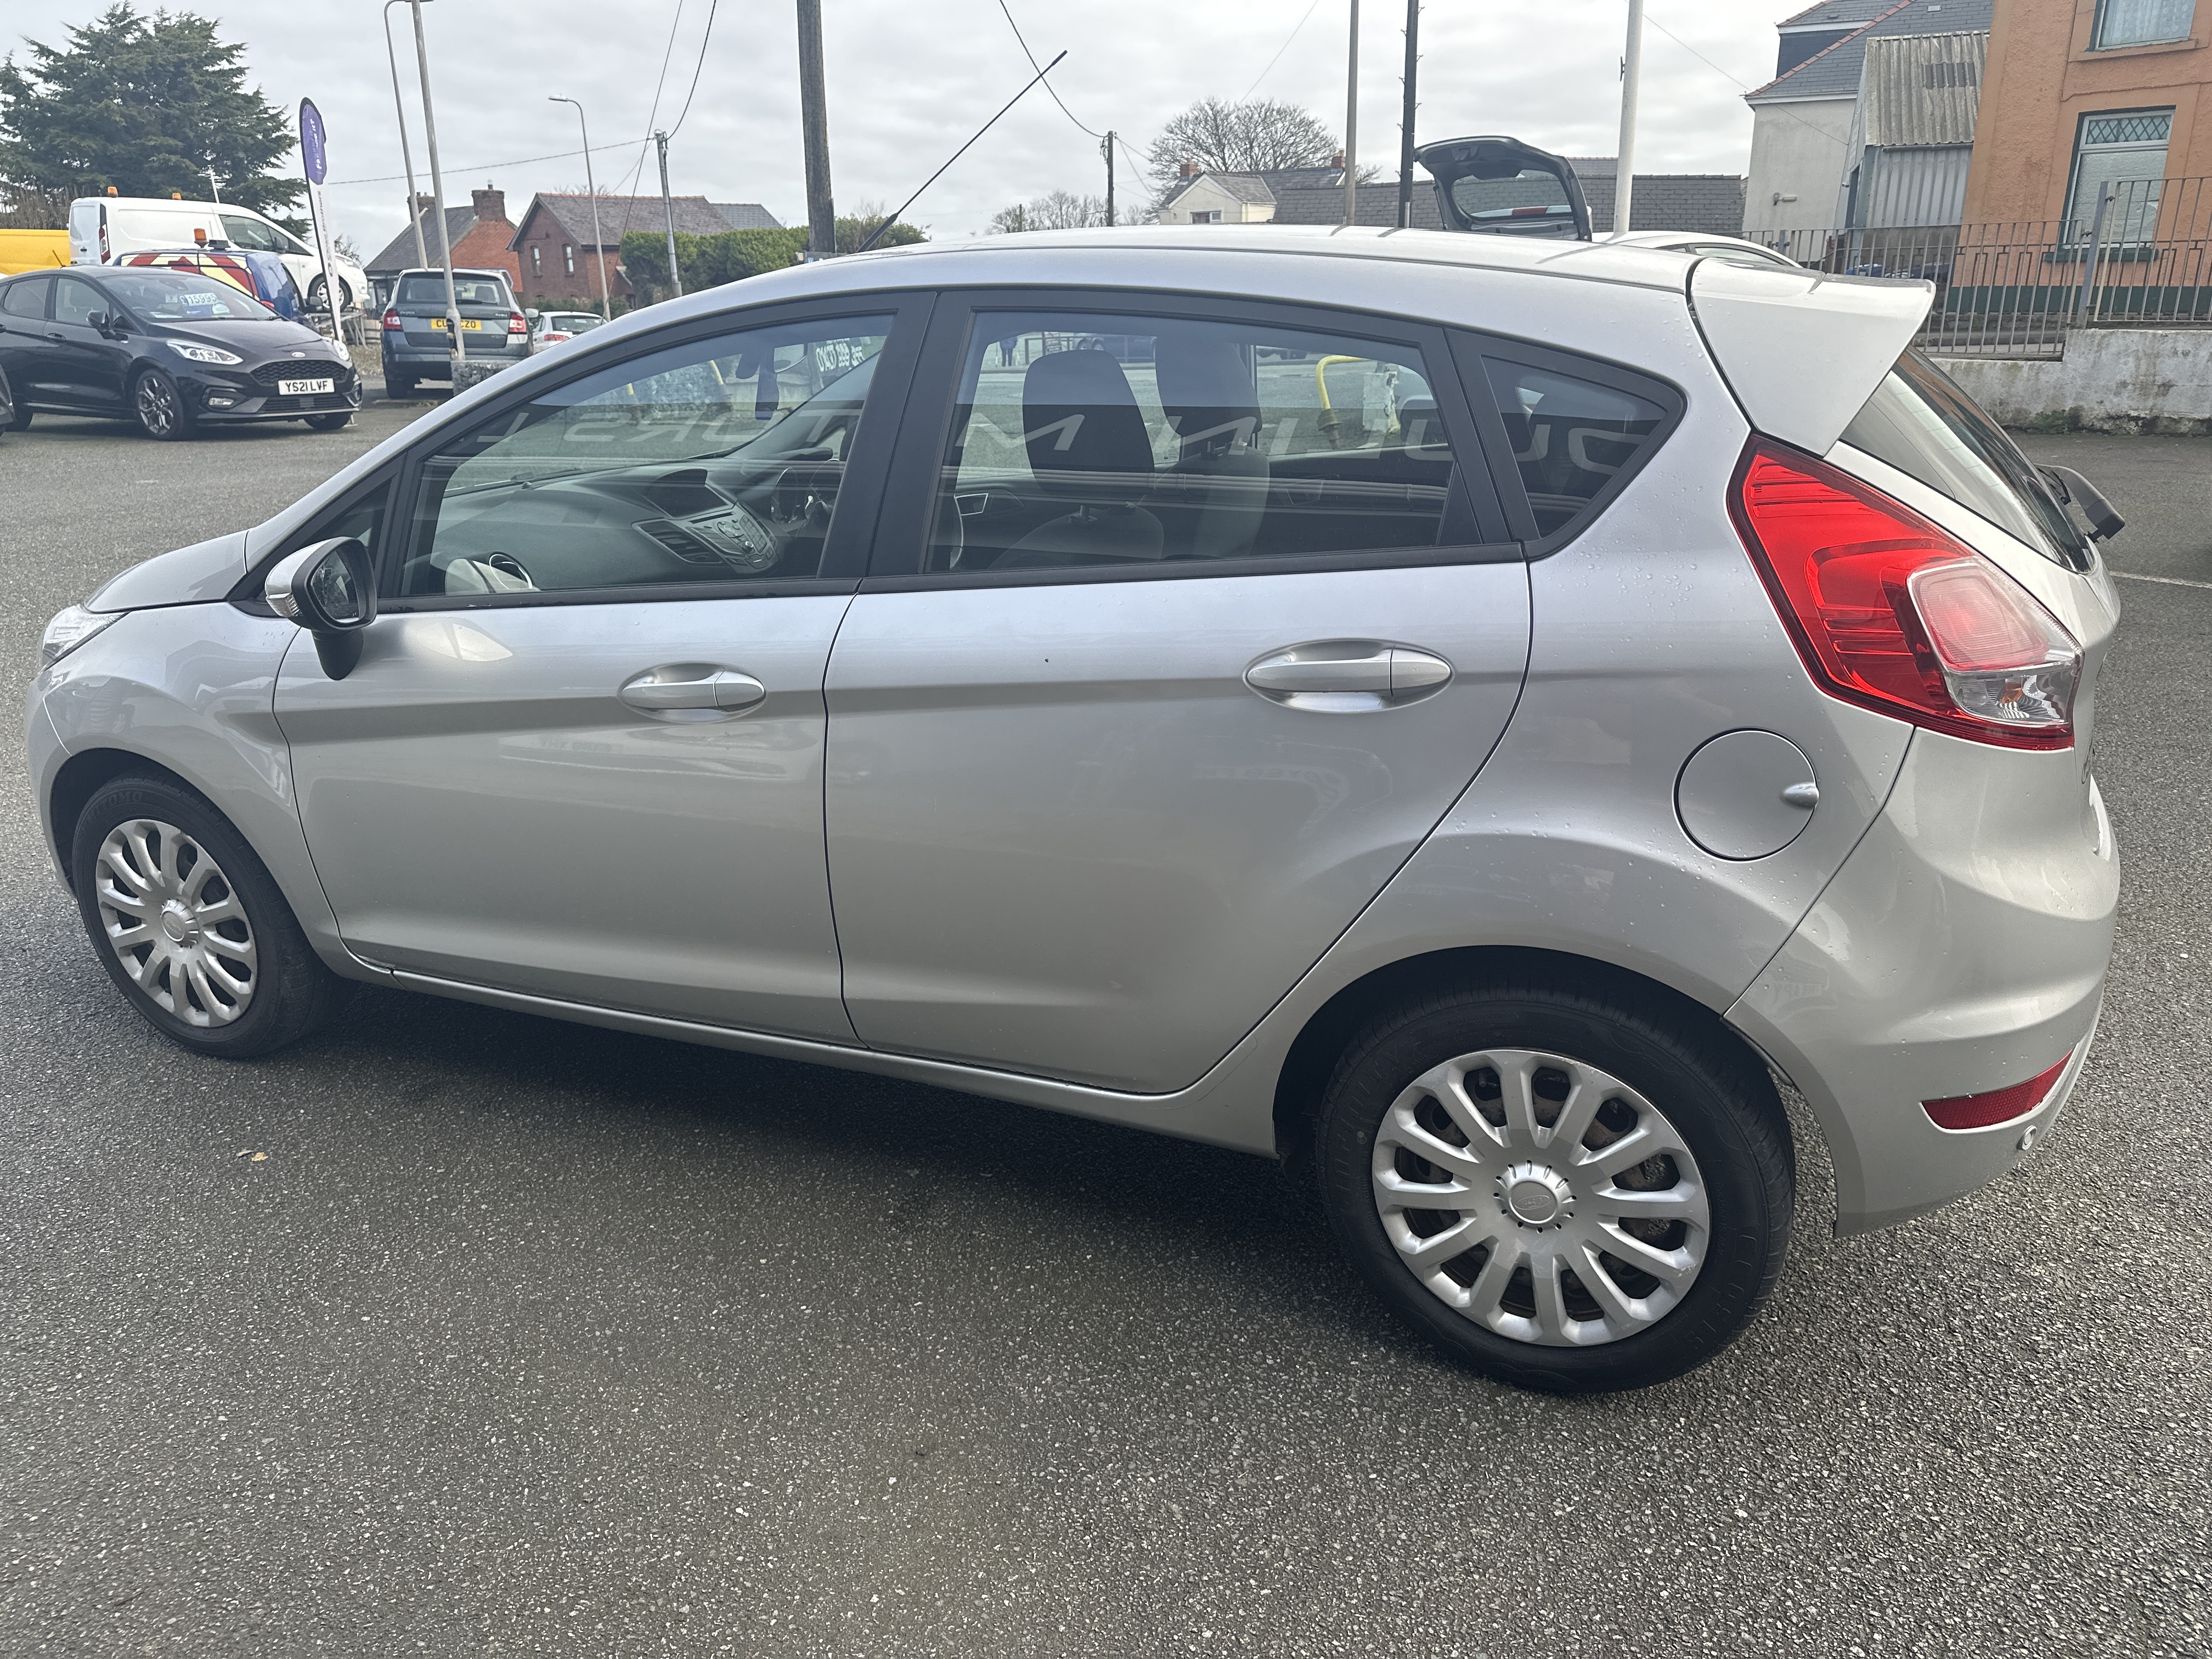 Ford FIESTA STYLE TDCI for sale at Mike Howlin Motor Sales Pembrokeshire